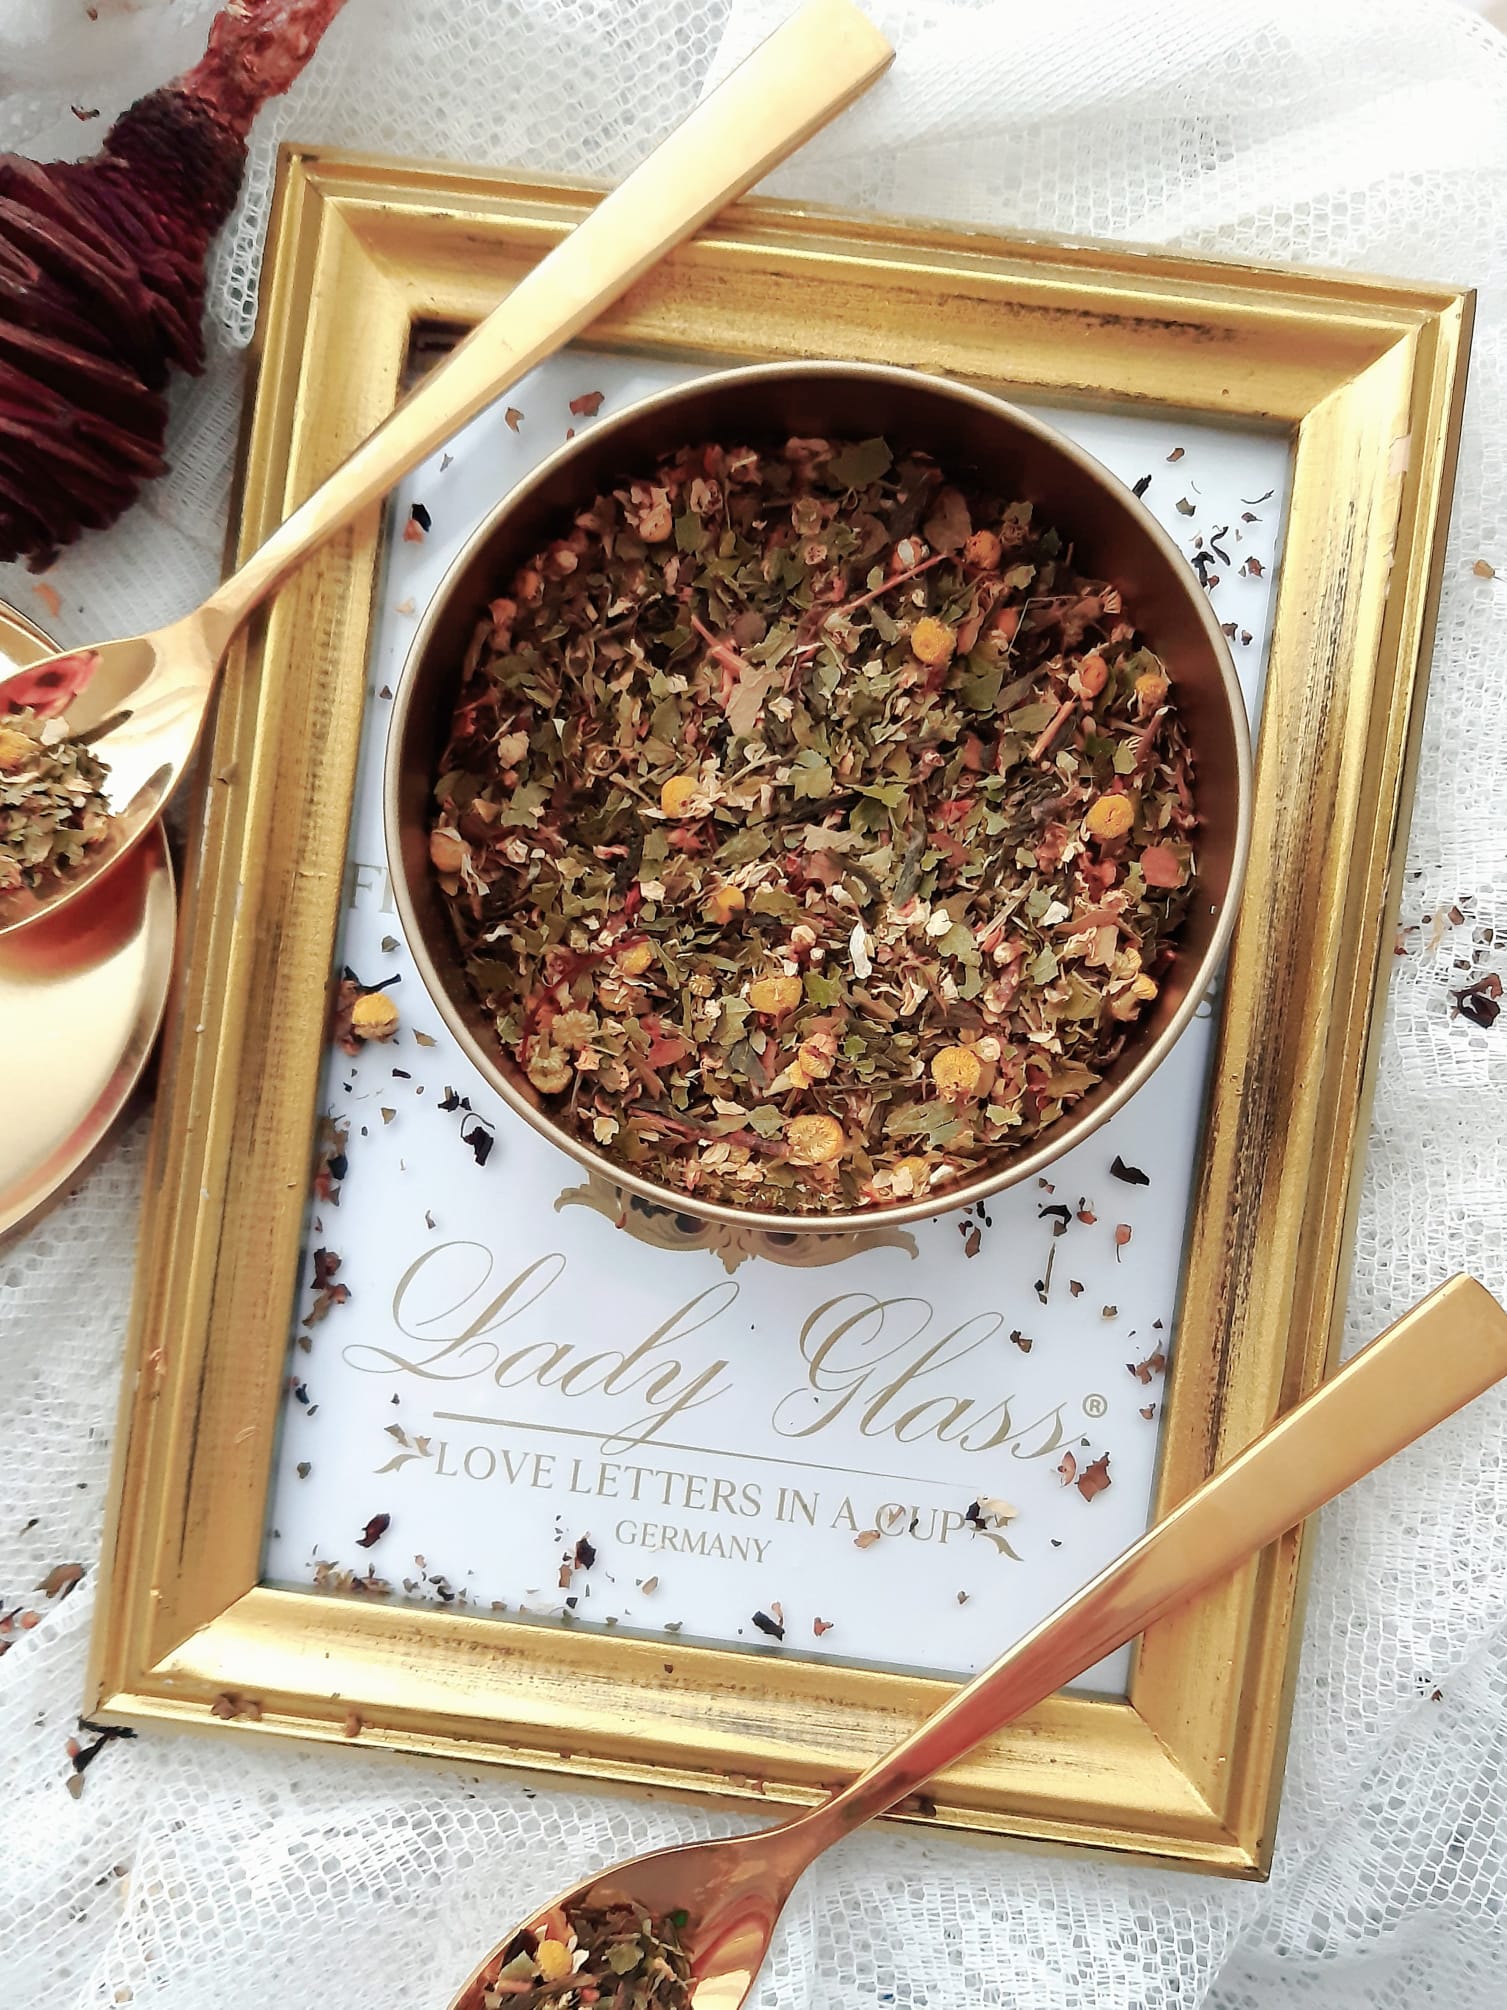 Premium loose leaf Hawthorn and Chamomile grief healing tea in a gold tin